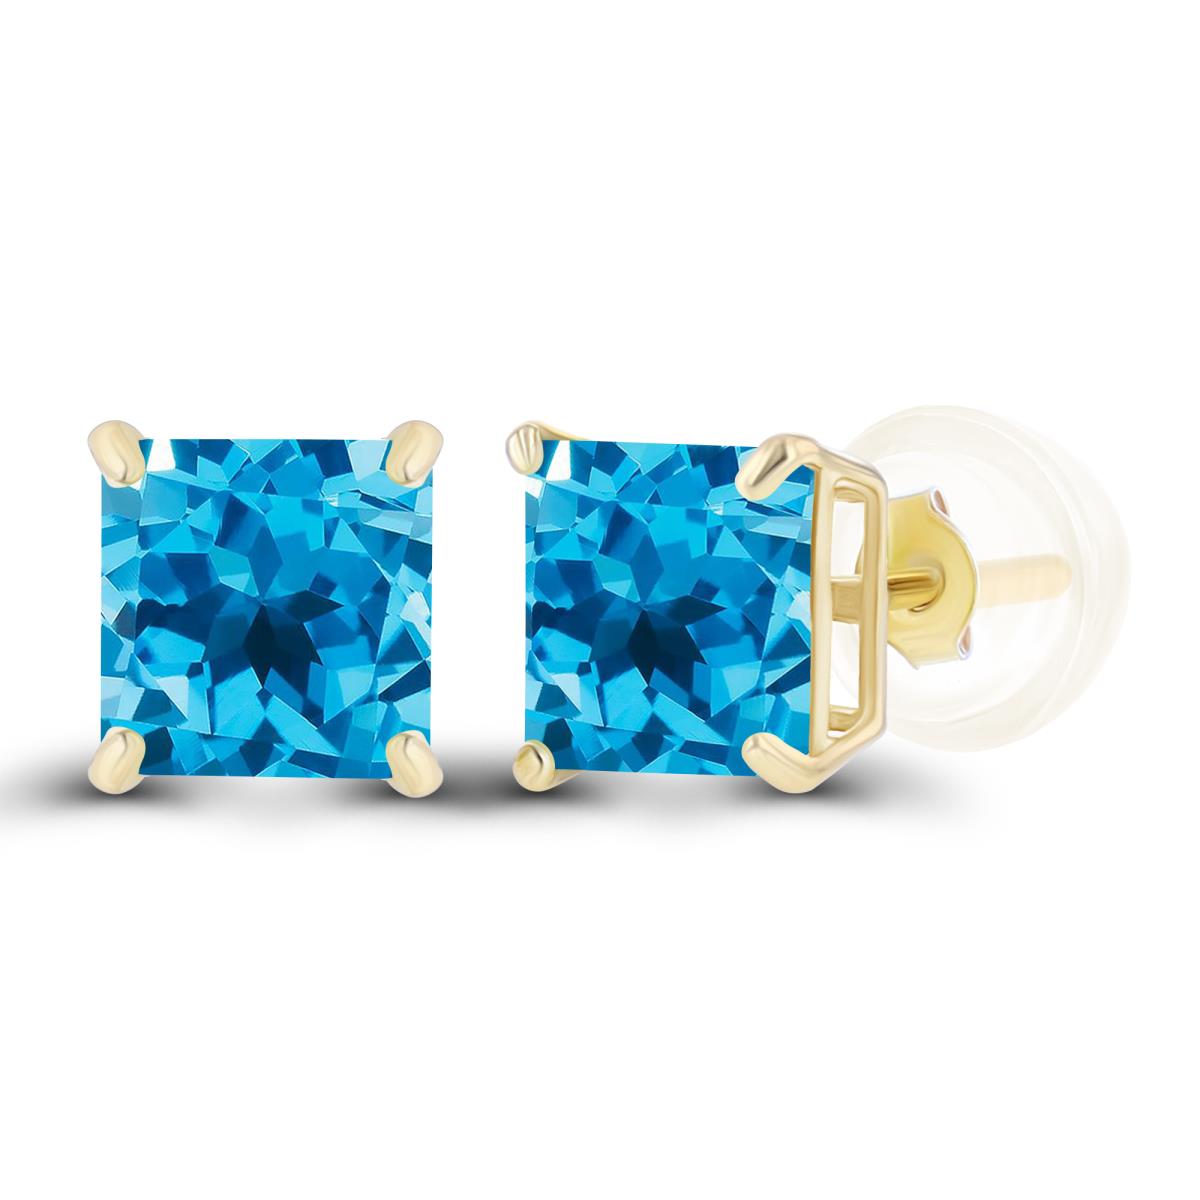 Sterling Silver Yellow 5mm Square Swiss Blue Topaz Basket Stud Earrings with Silicone Back